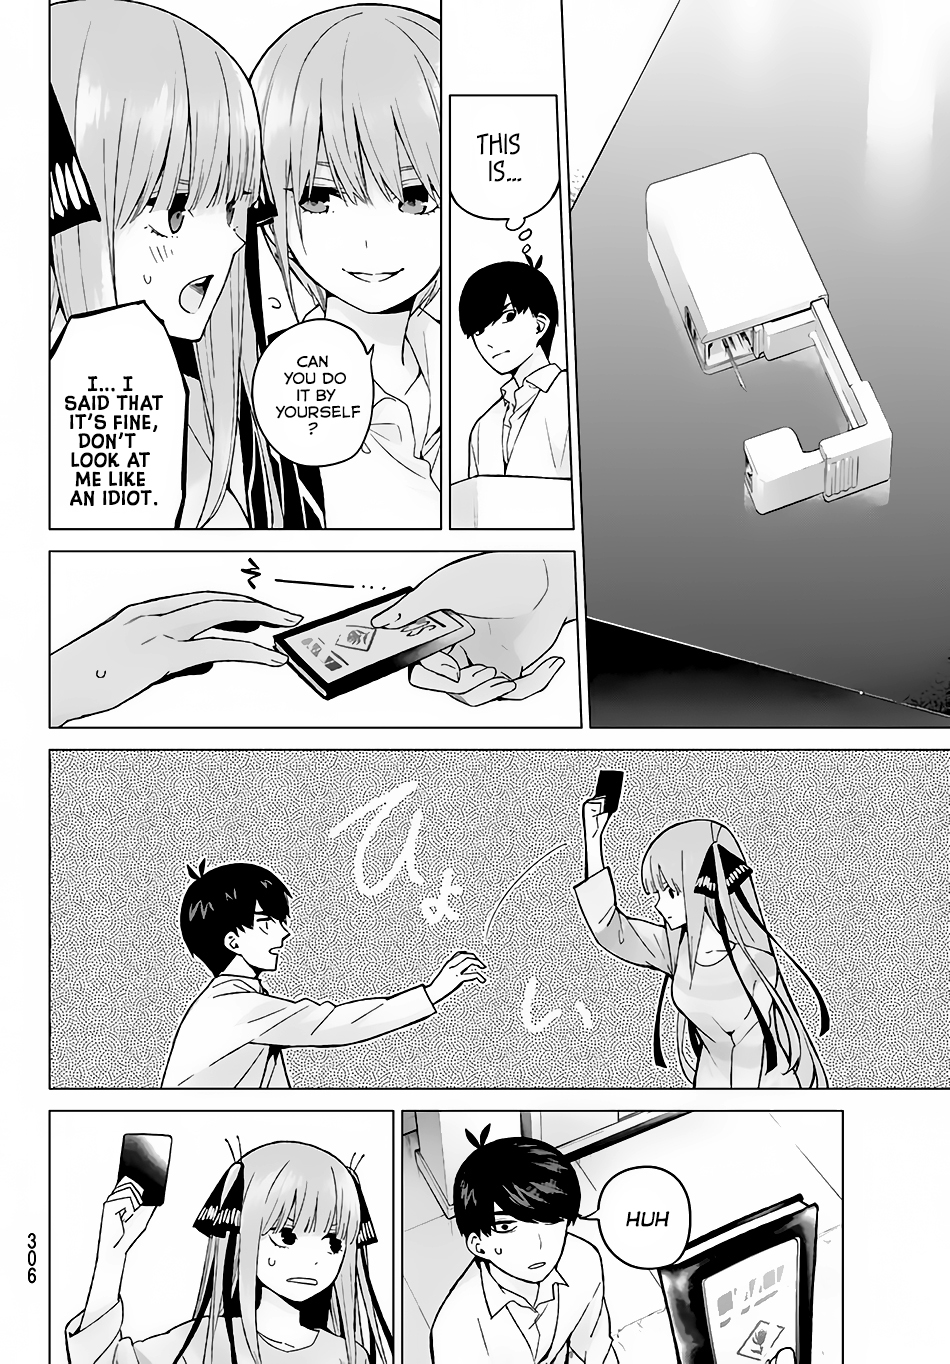 5Toubun no Hanayome Vol. 2 Ch. 14 The Started Picture